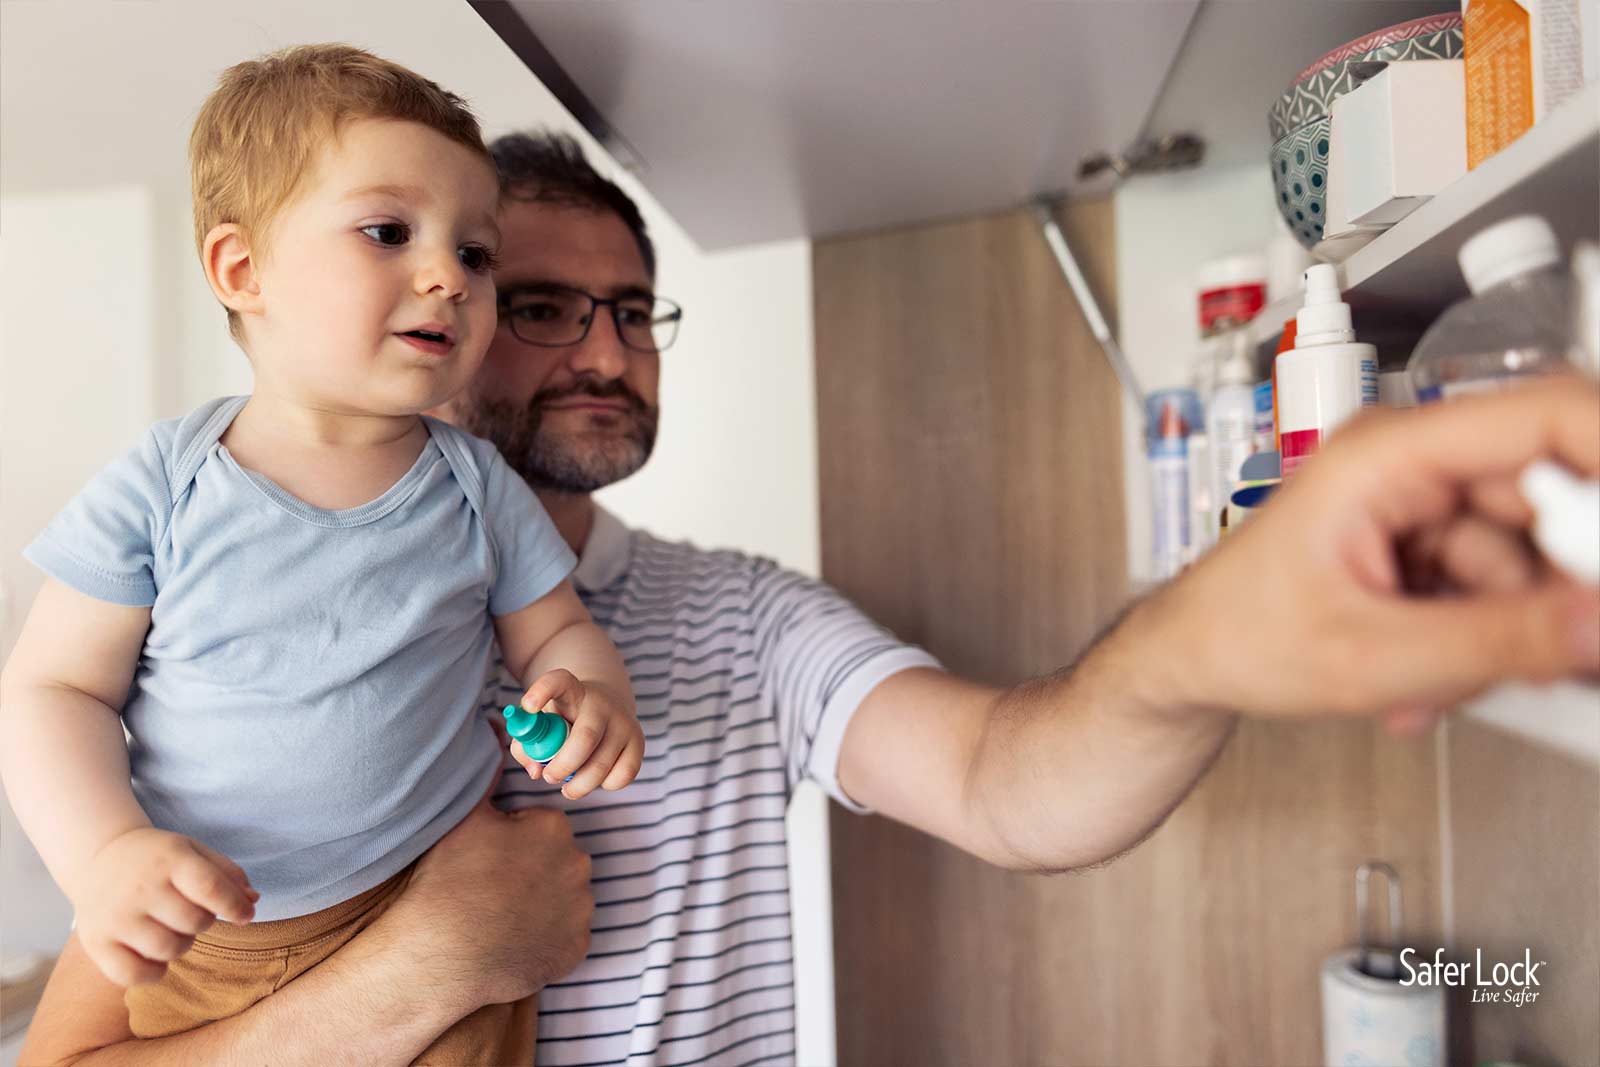 A man holding a toddler while looking at prescription medications in a cabinet.